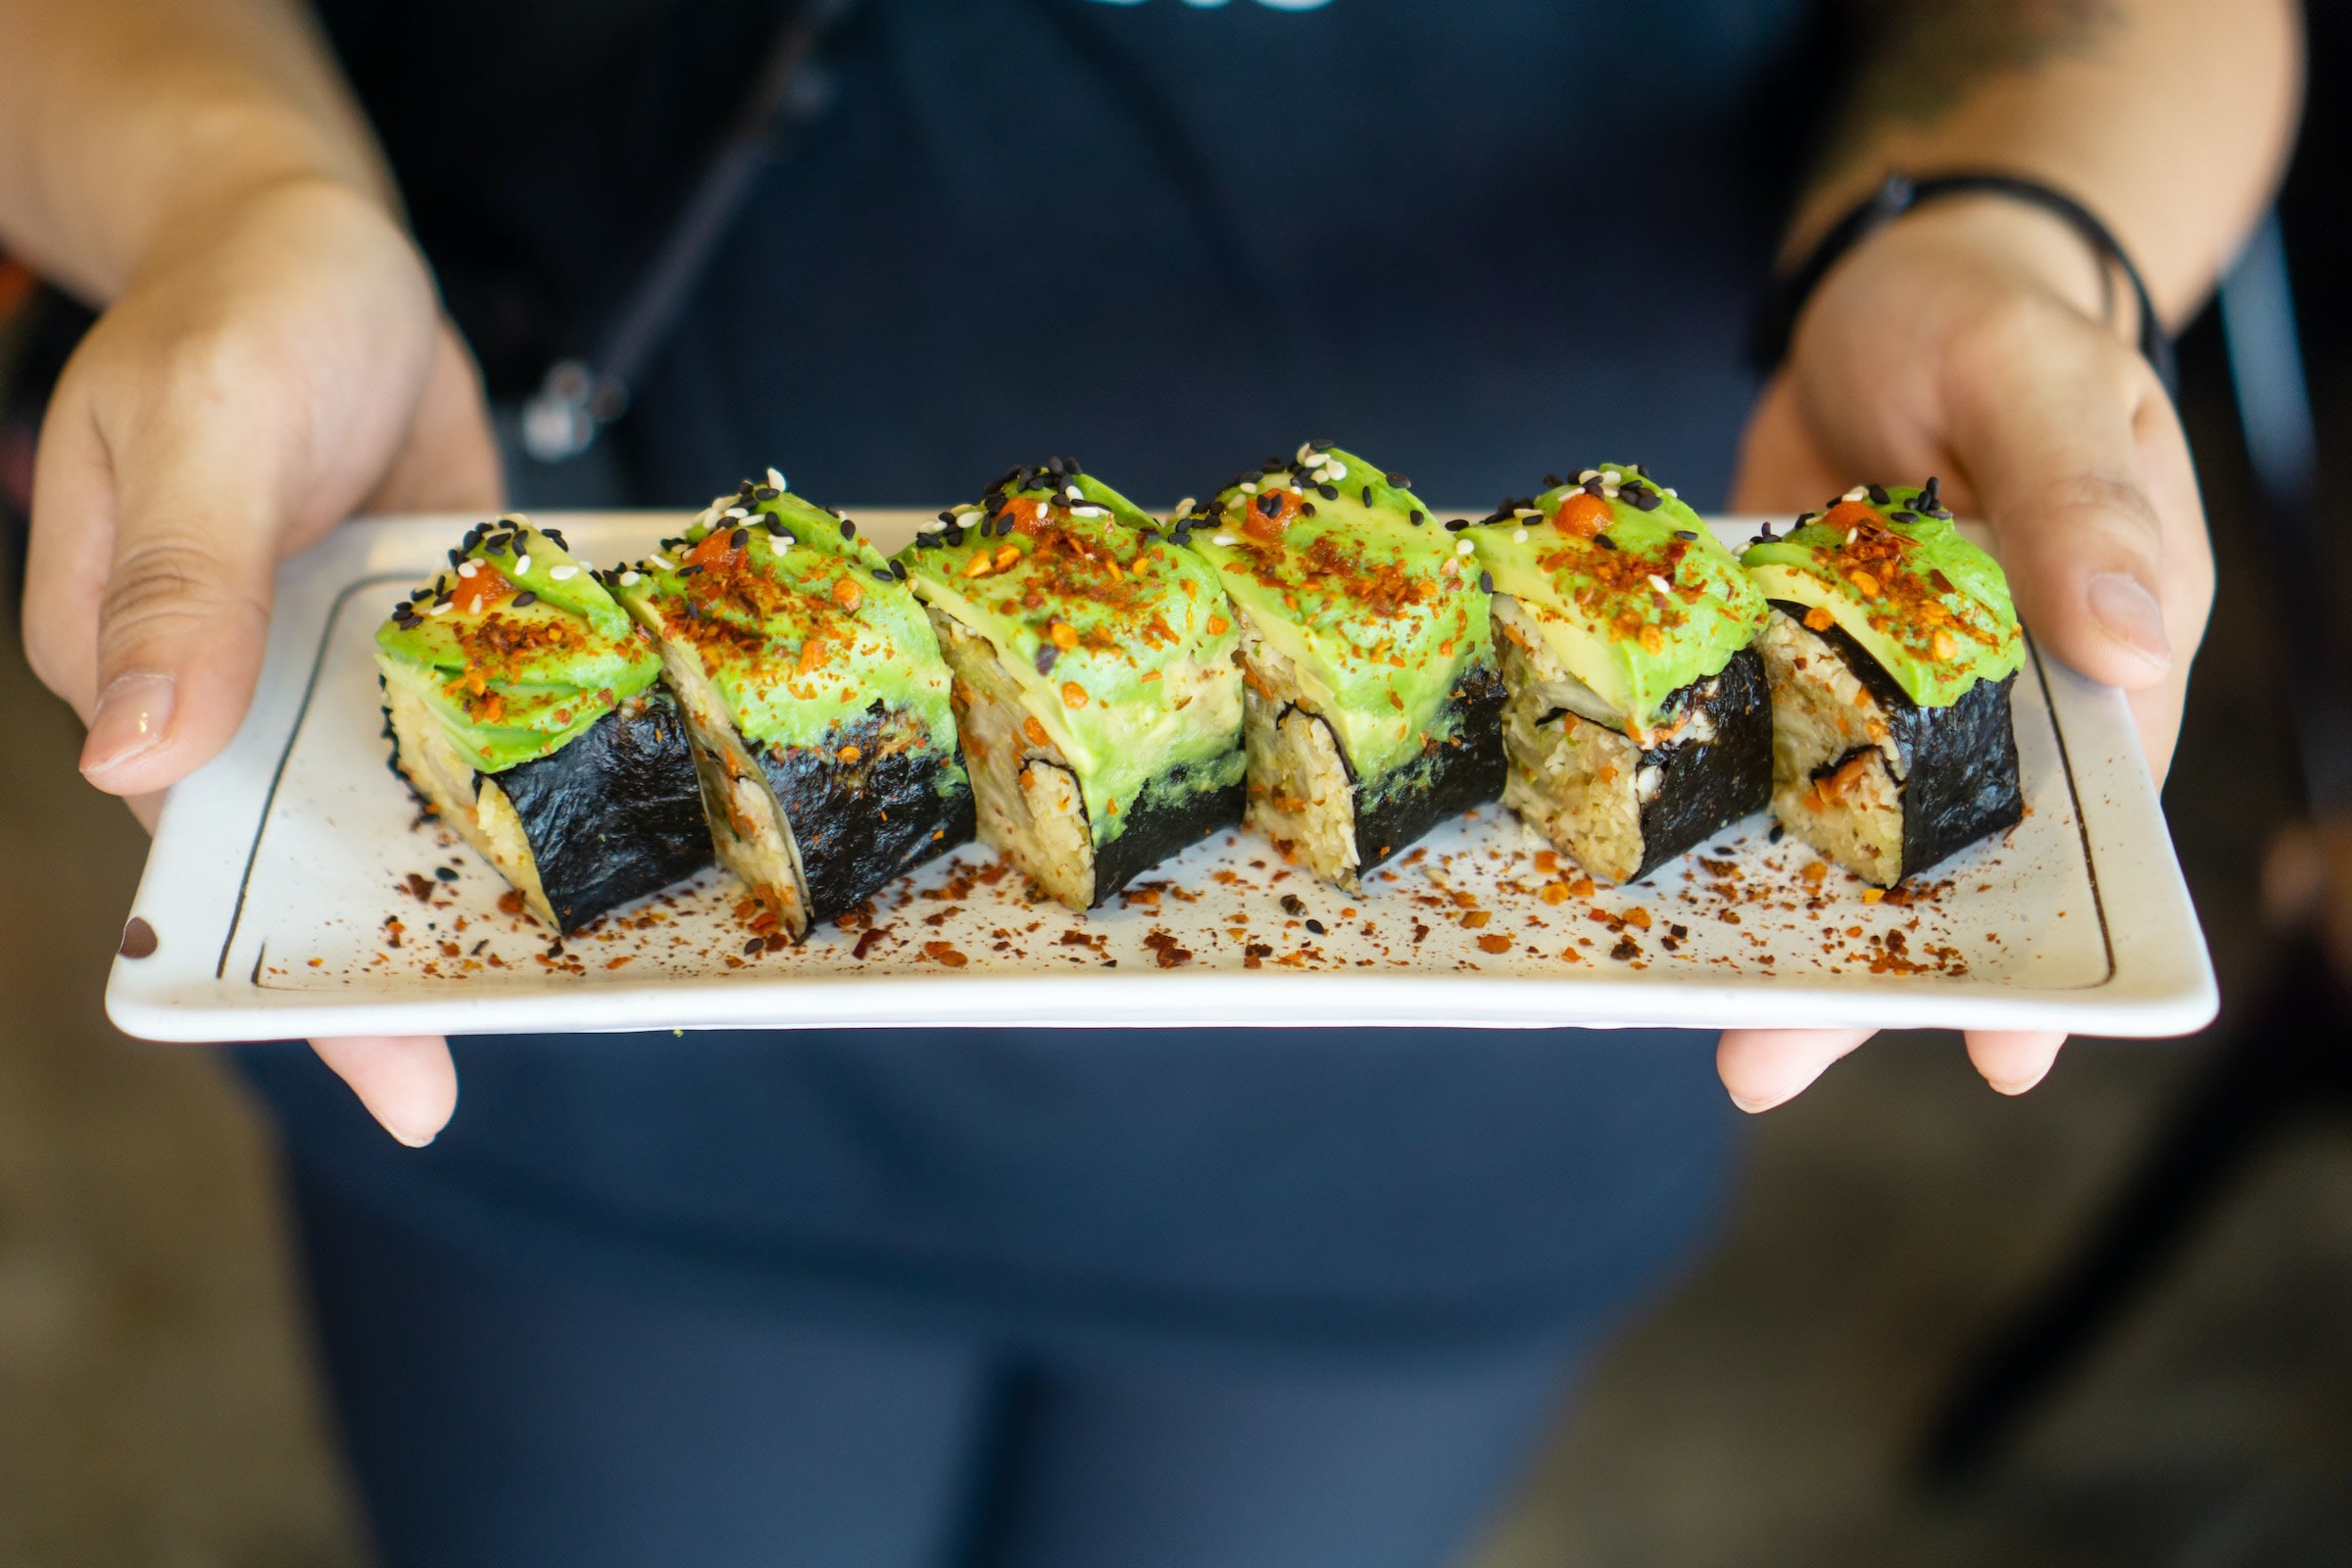 A pair of hands hold a platter of avocado sushi.